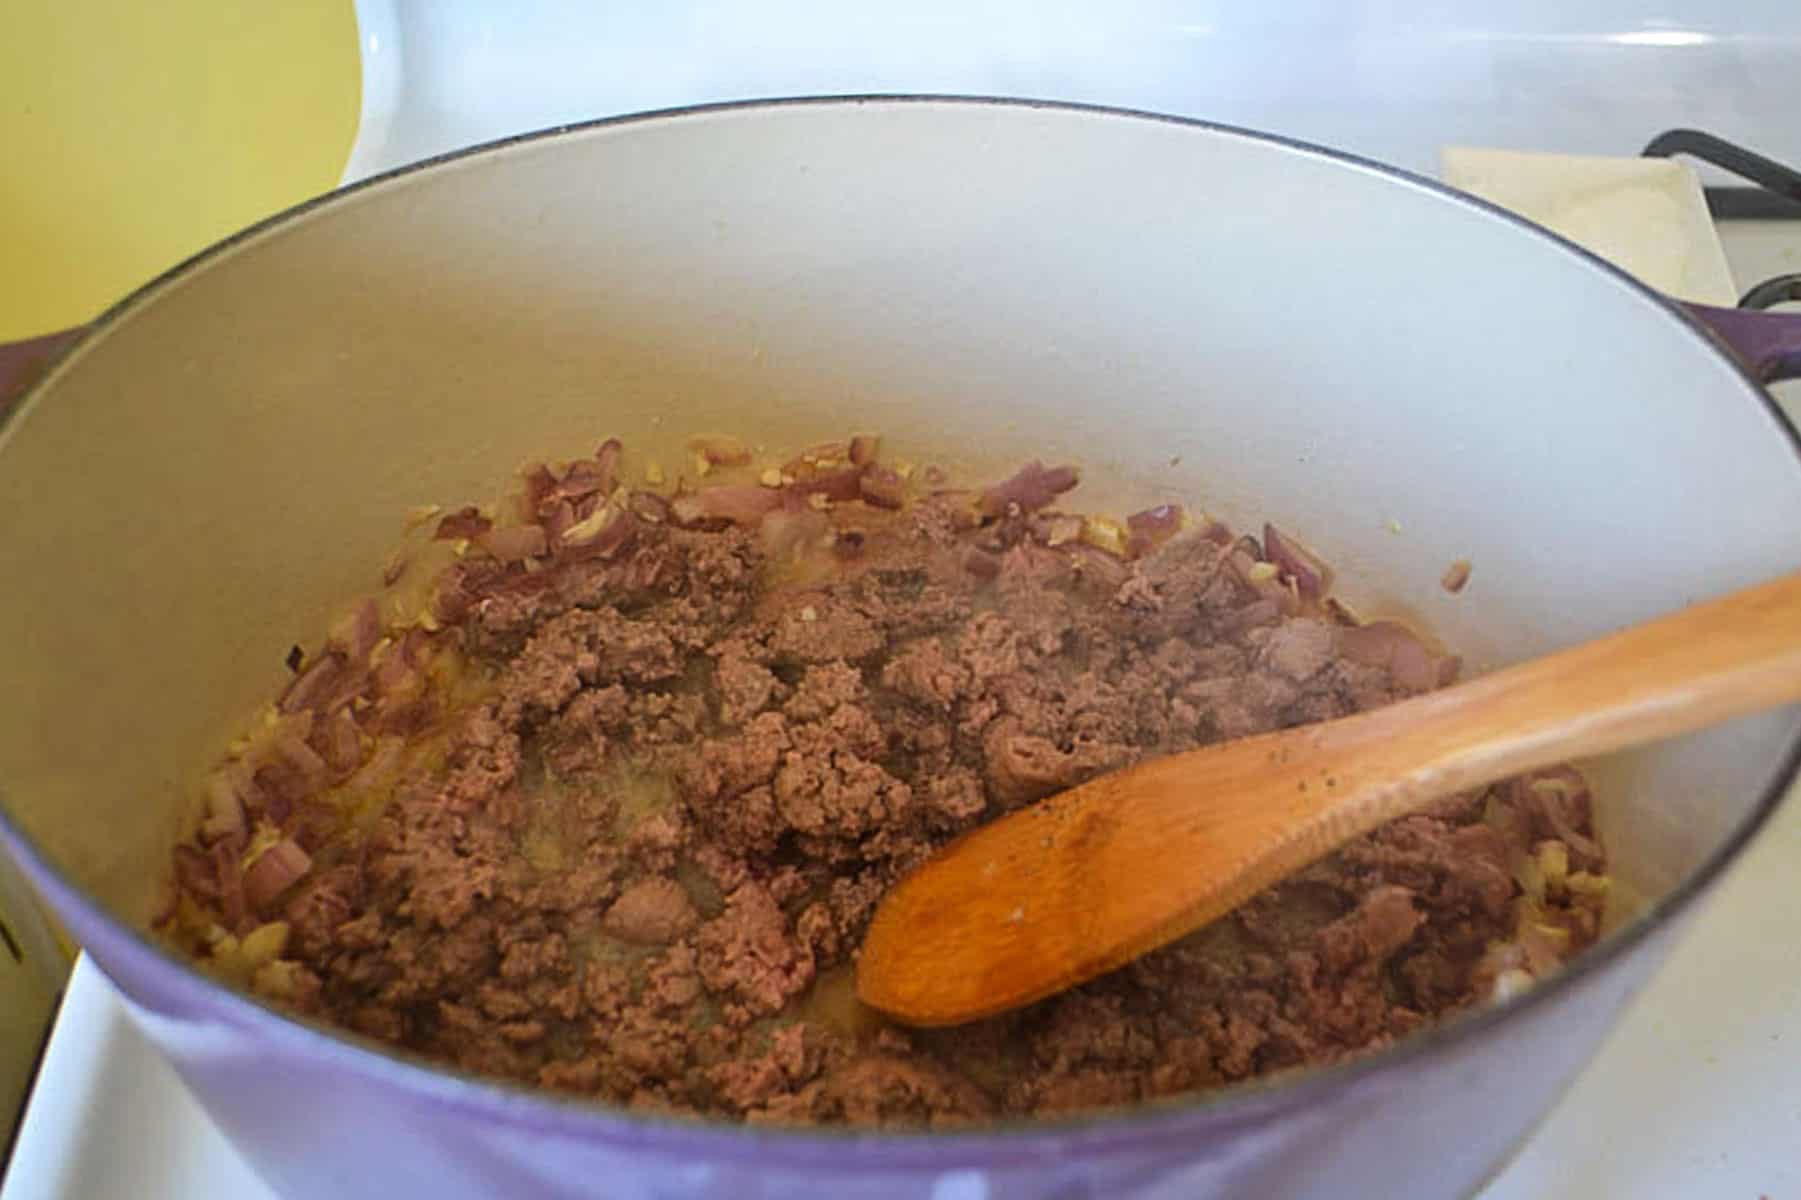 Cook the ground beef until charred on the outside and cooked all the way through.